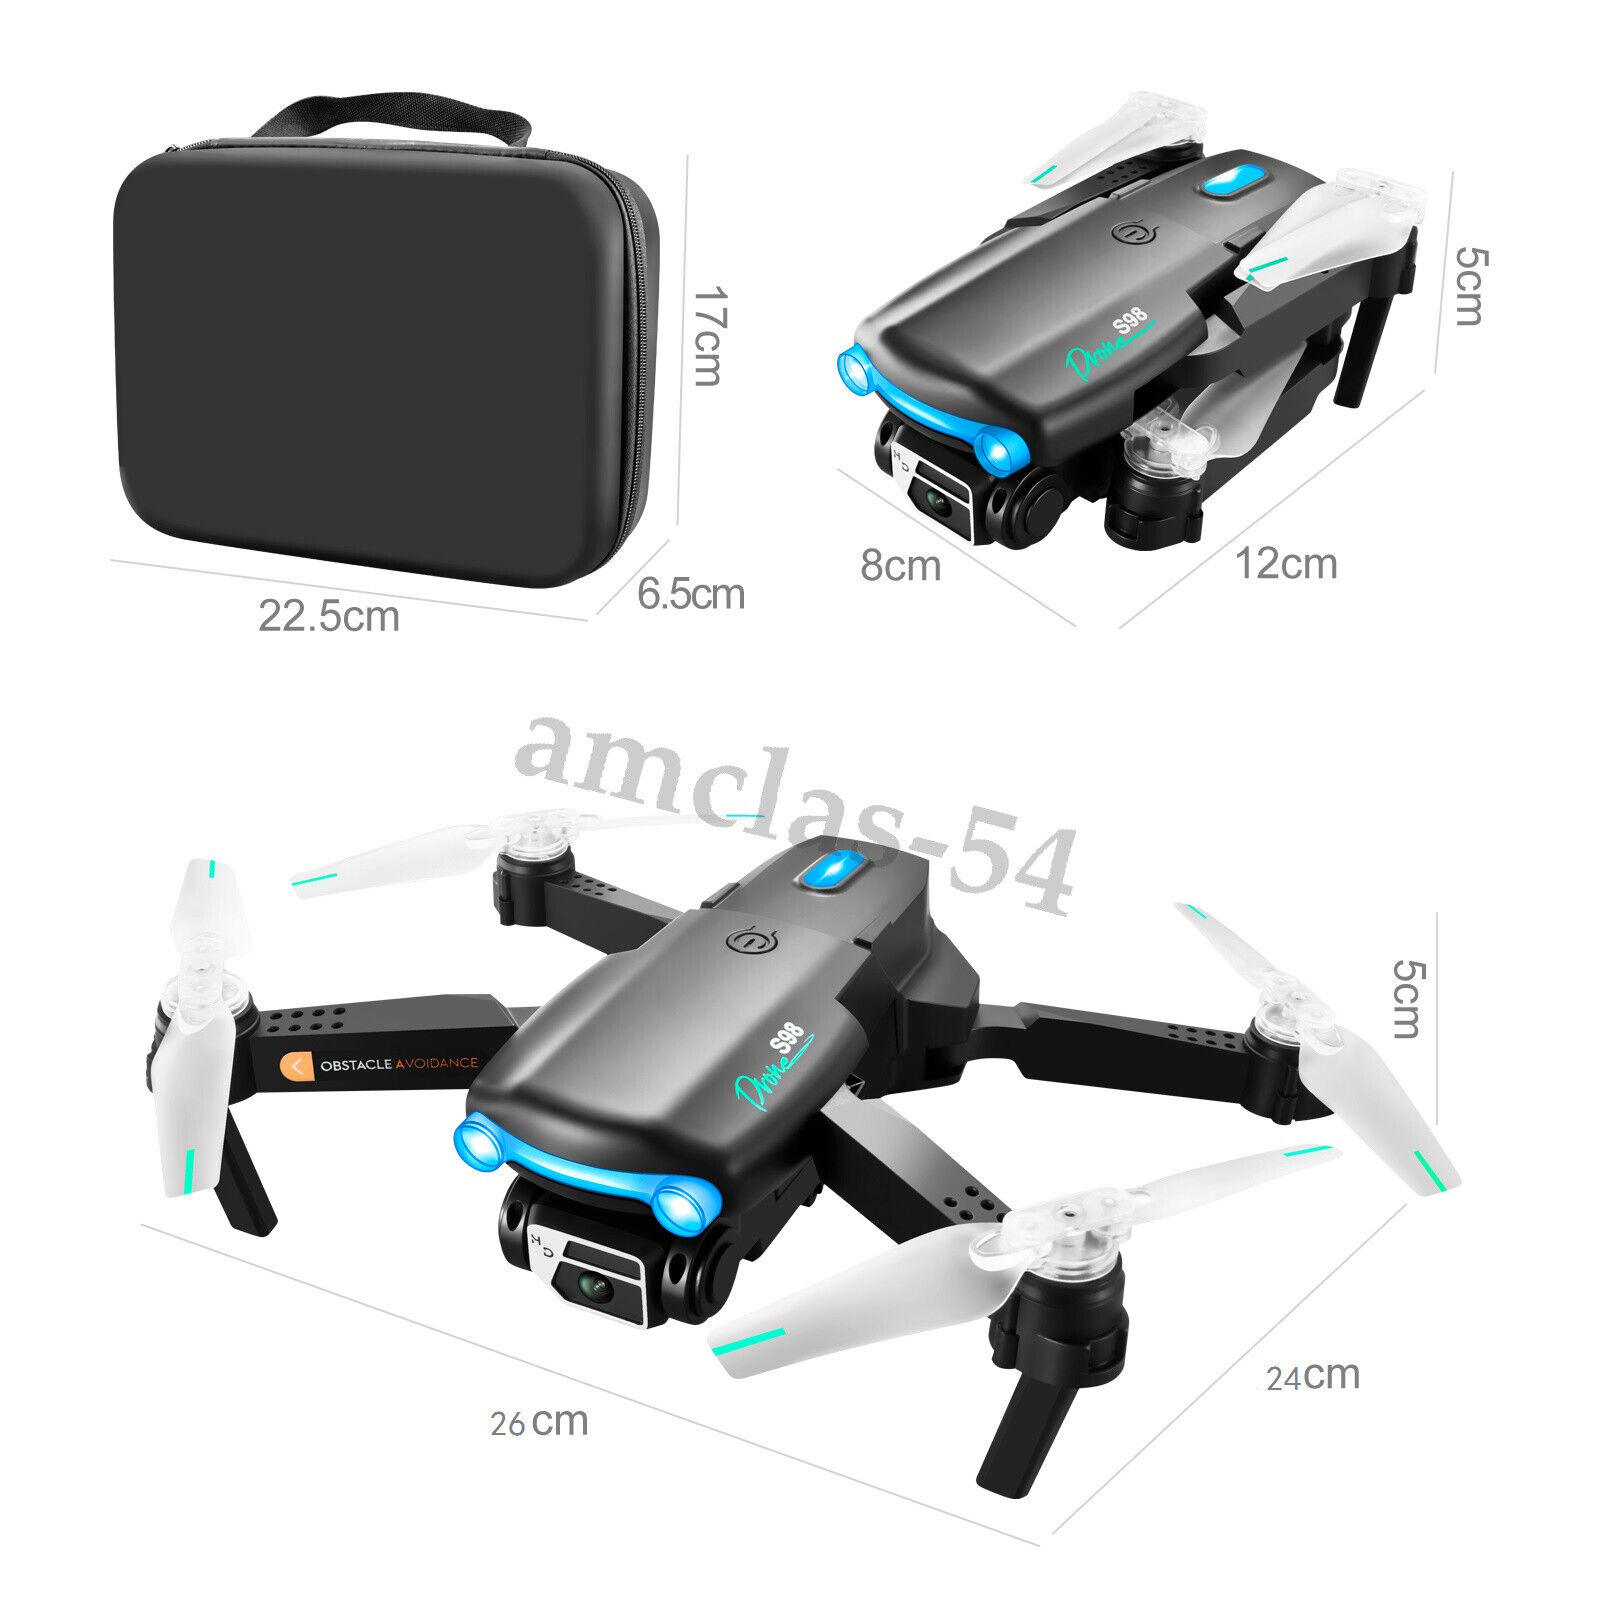 Foldable Drone with 4K Camera & Obstacle Avoidance